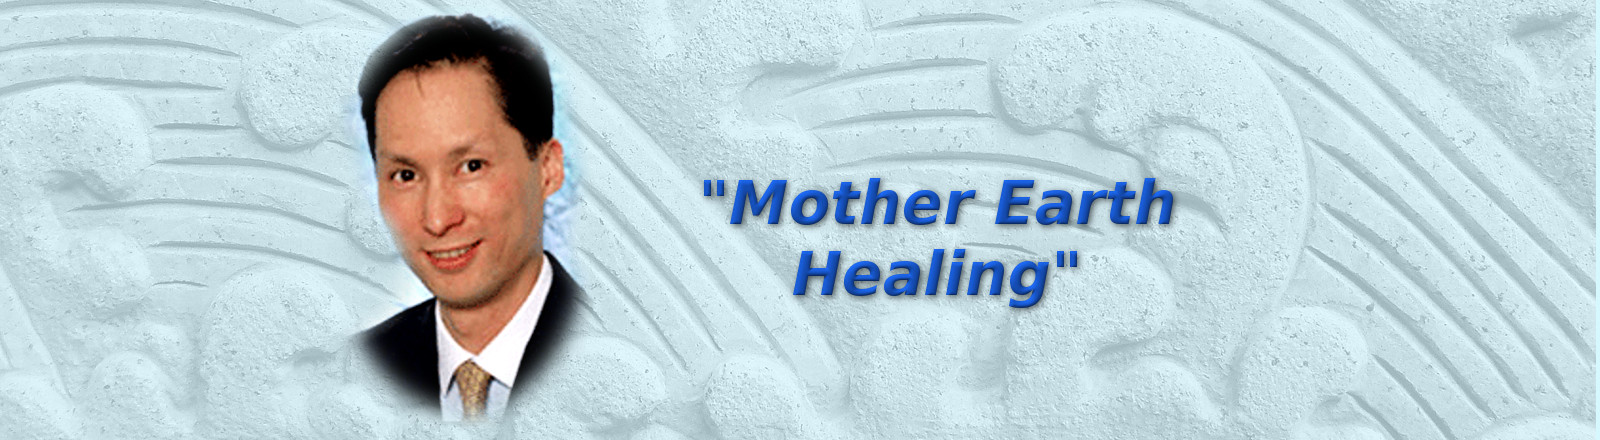 mother earth healing